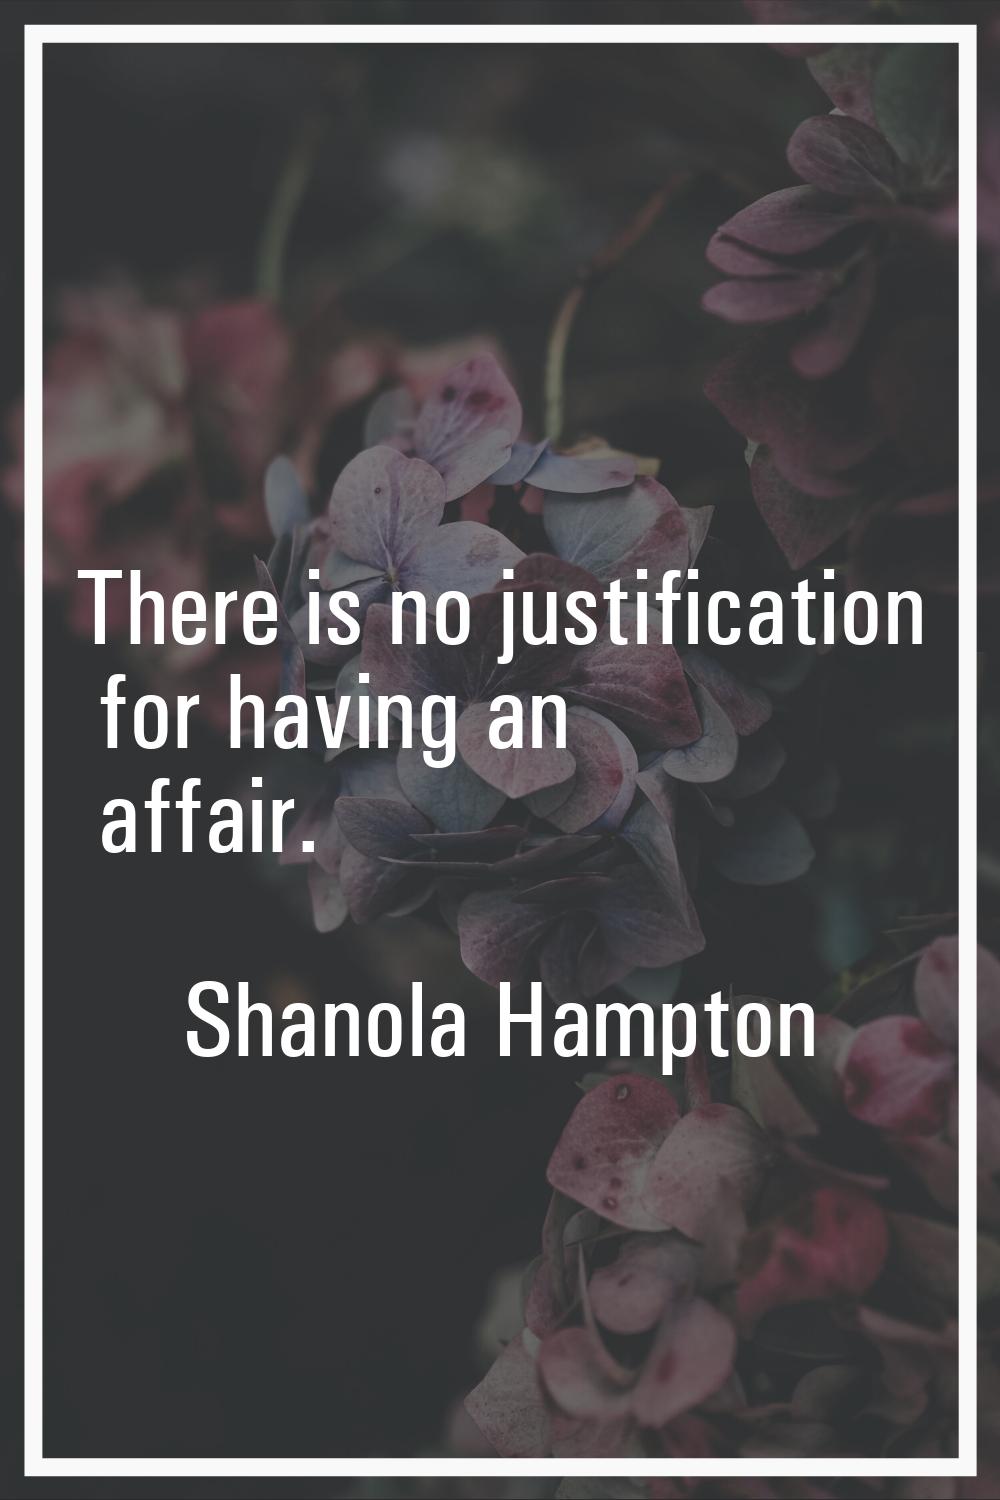 There is no justification for having an affair.